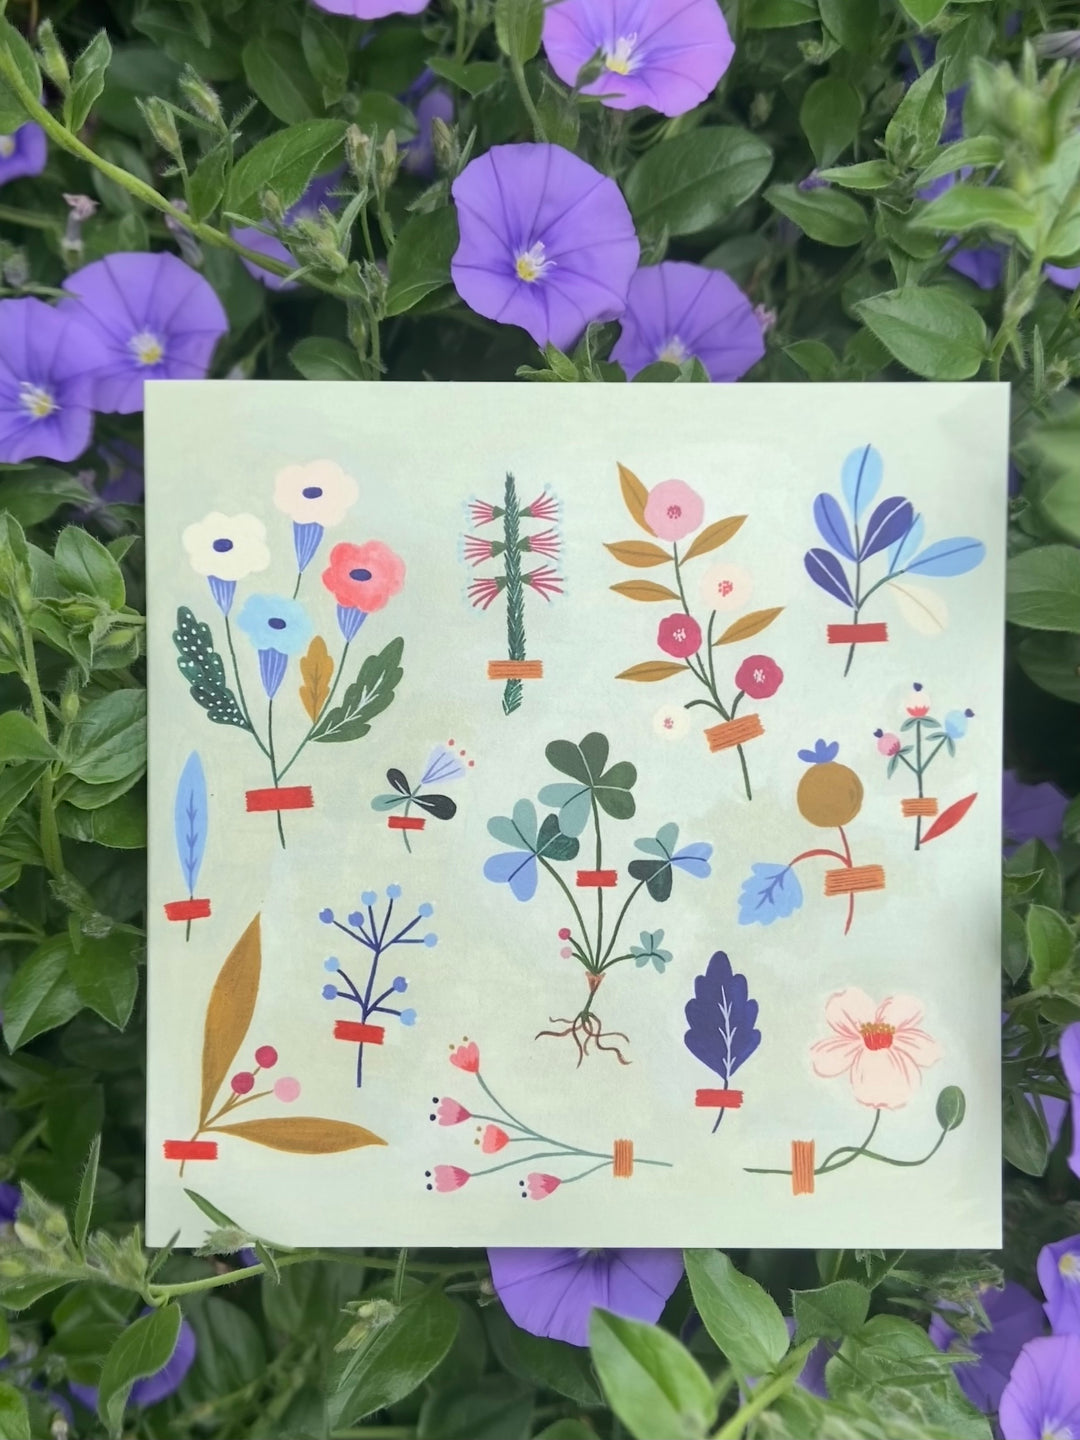 Floral Connections with illustrator FLORA WAYCOTT